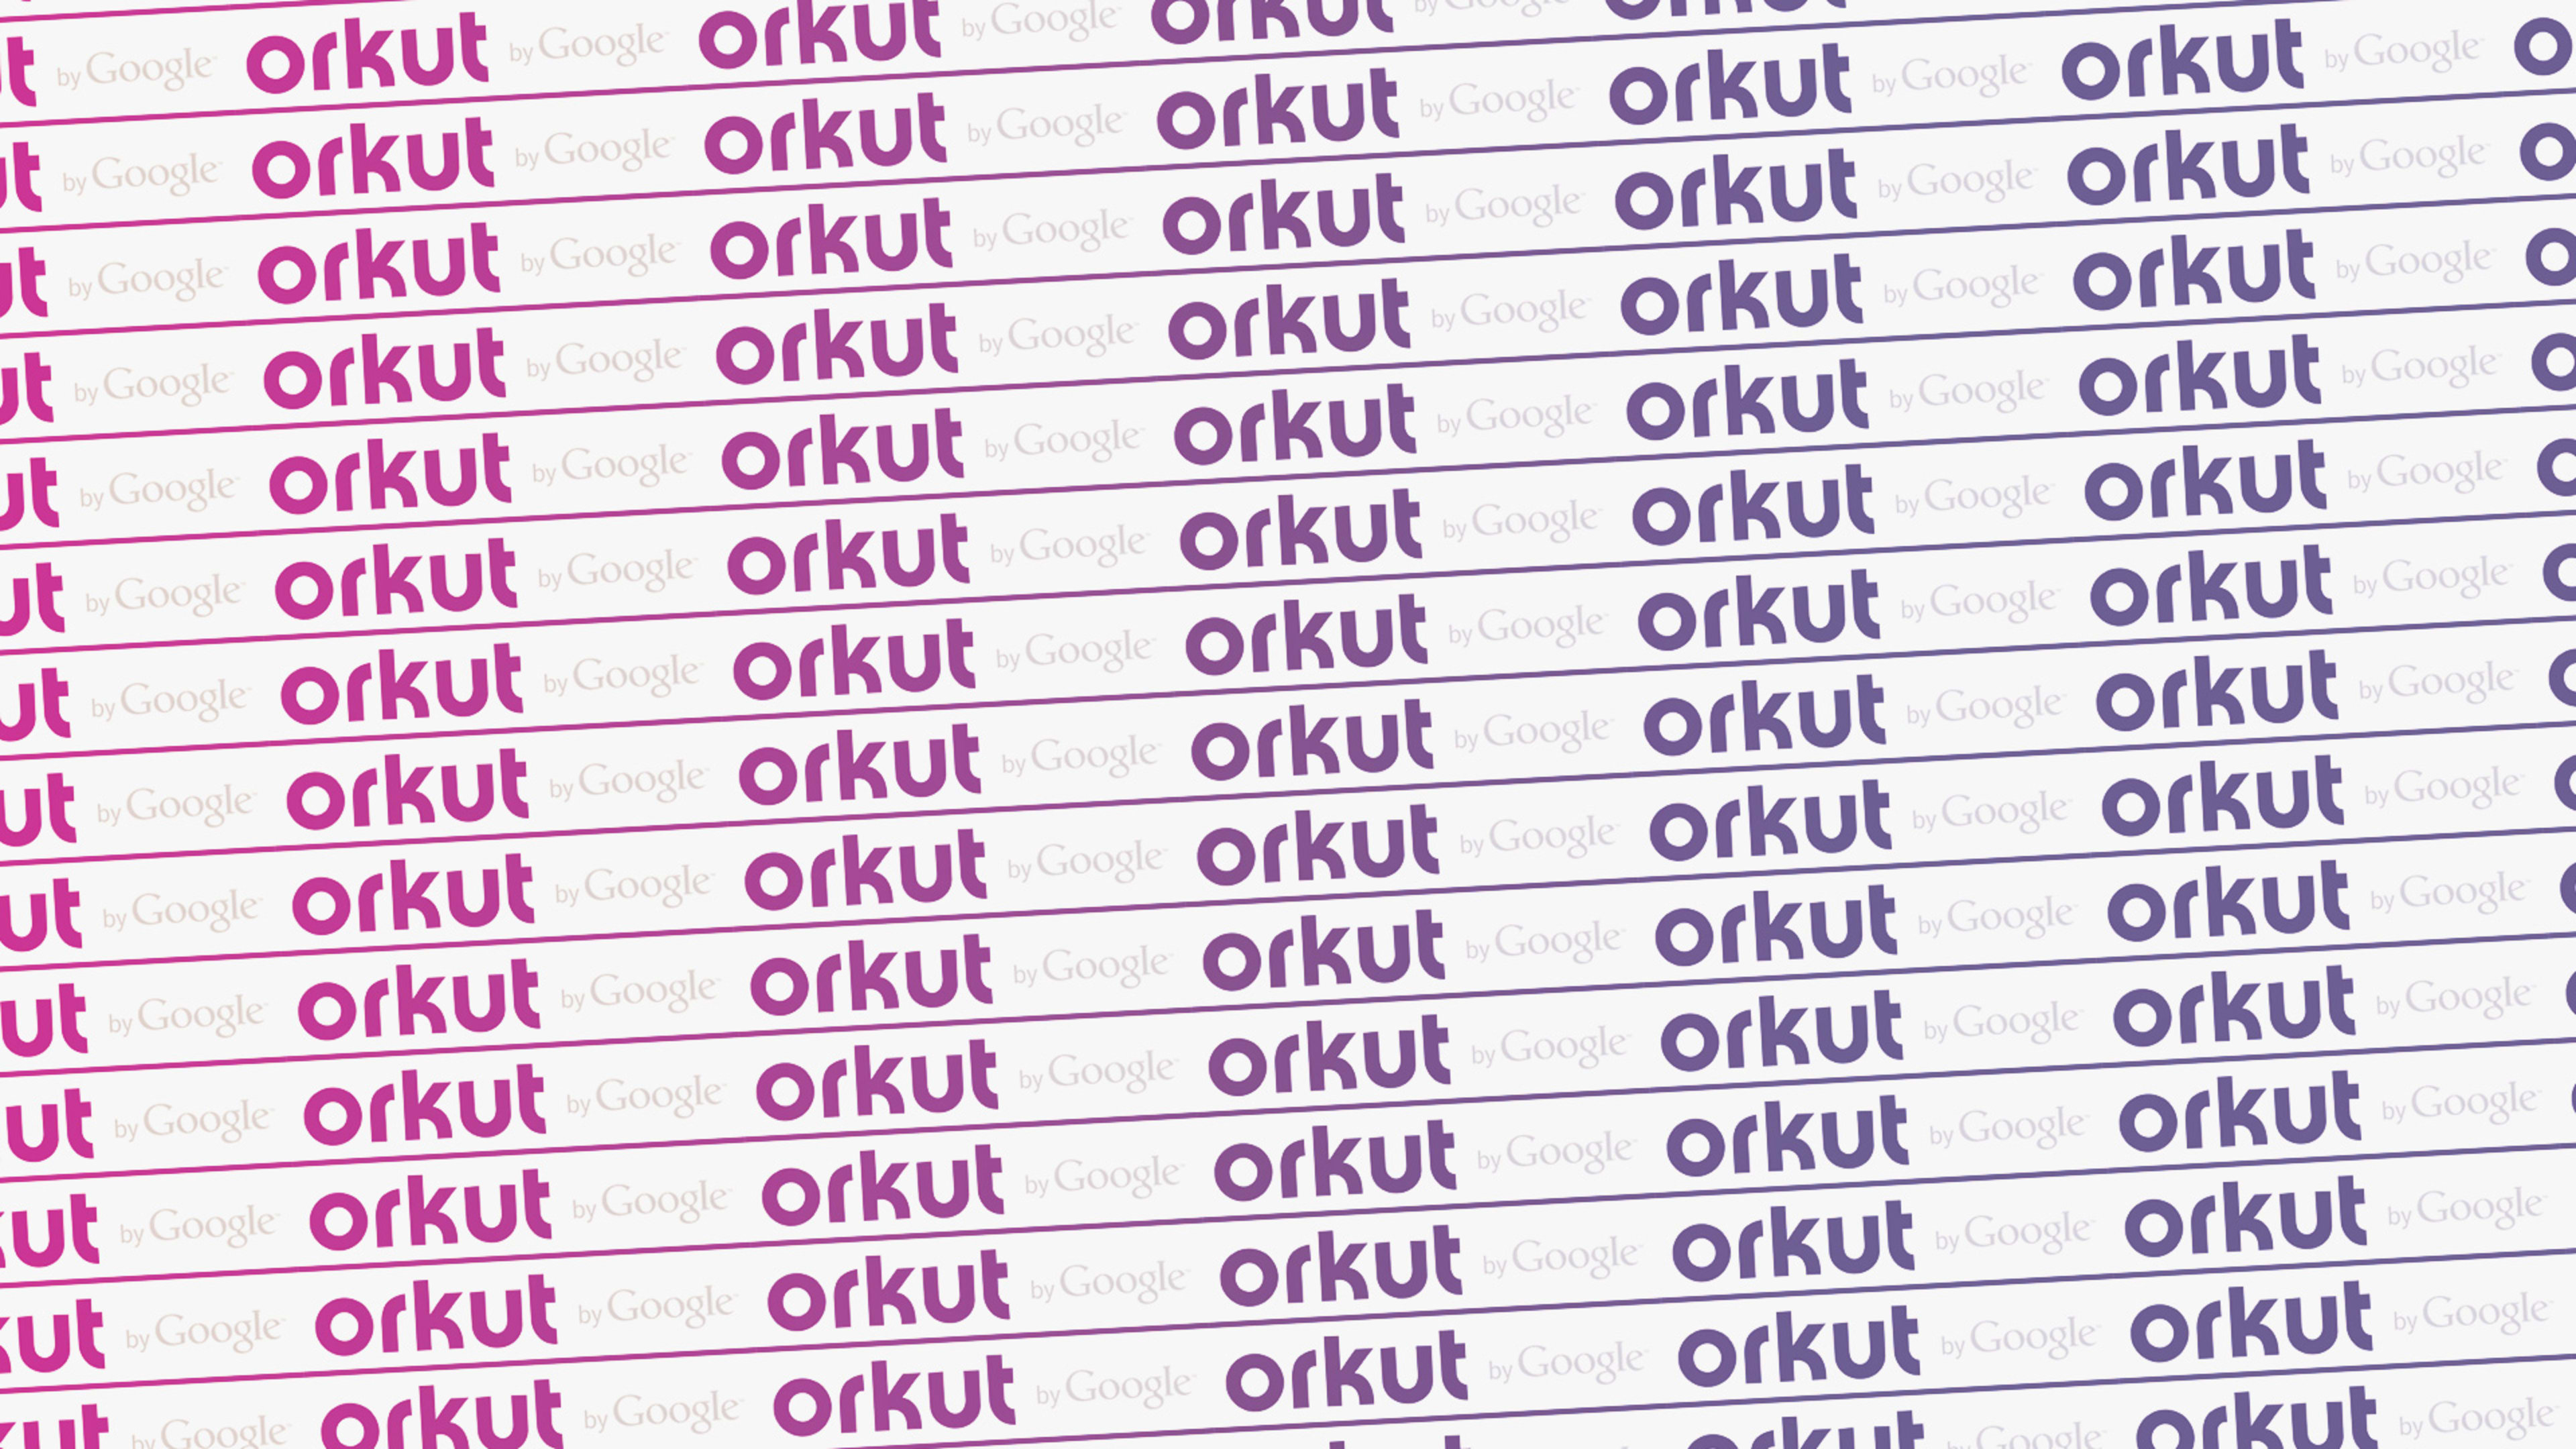 It’s Time To Say Goodbye To Orkut, Google’s First Social Network